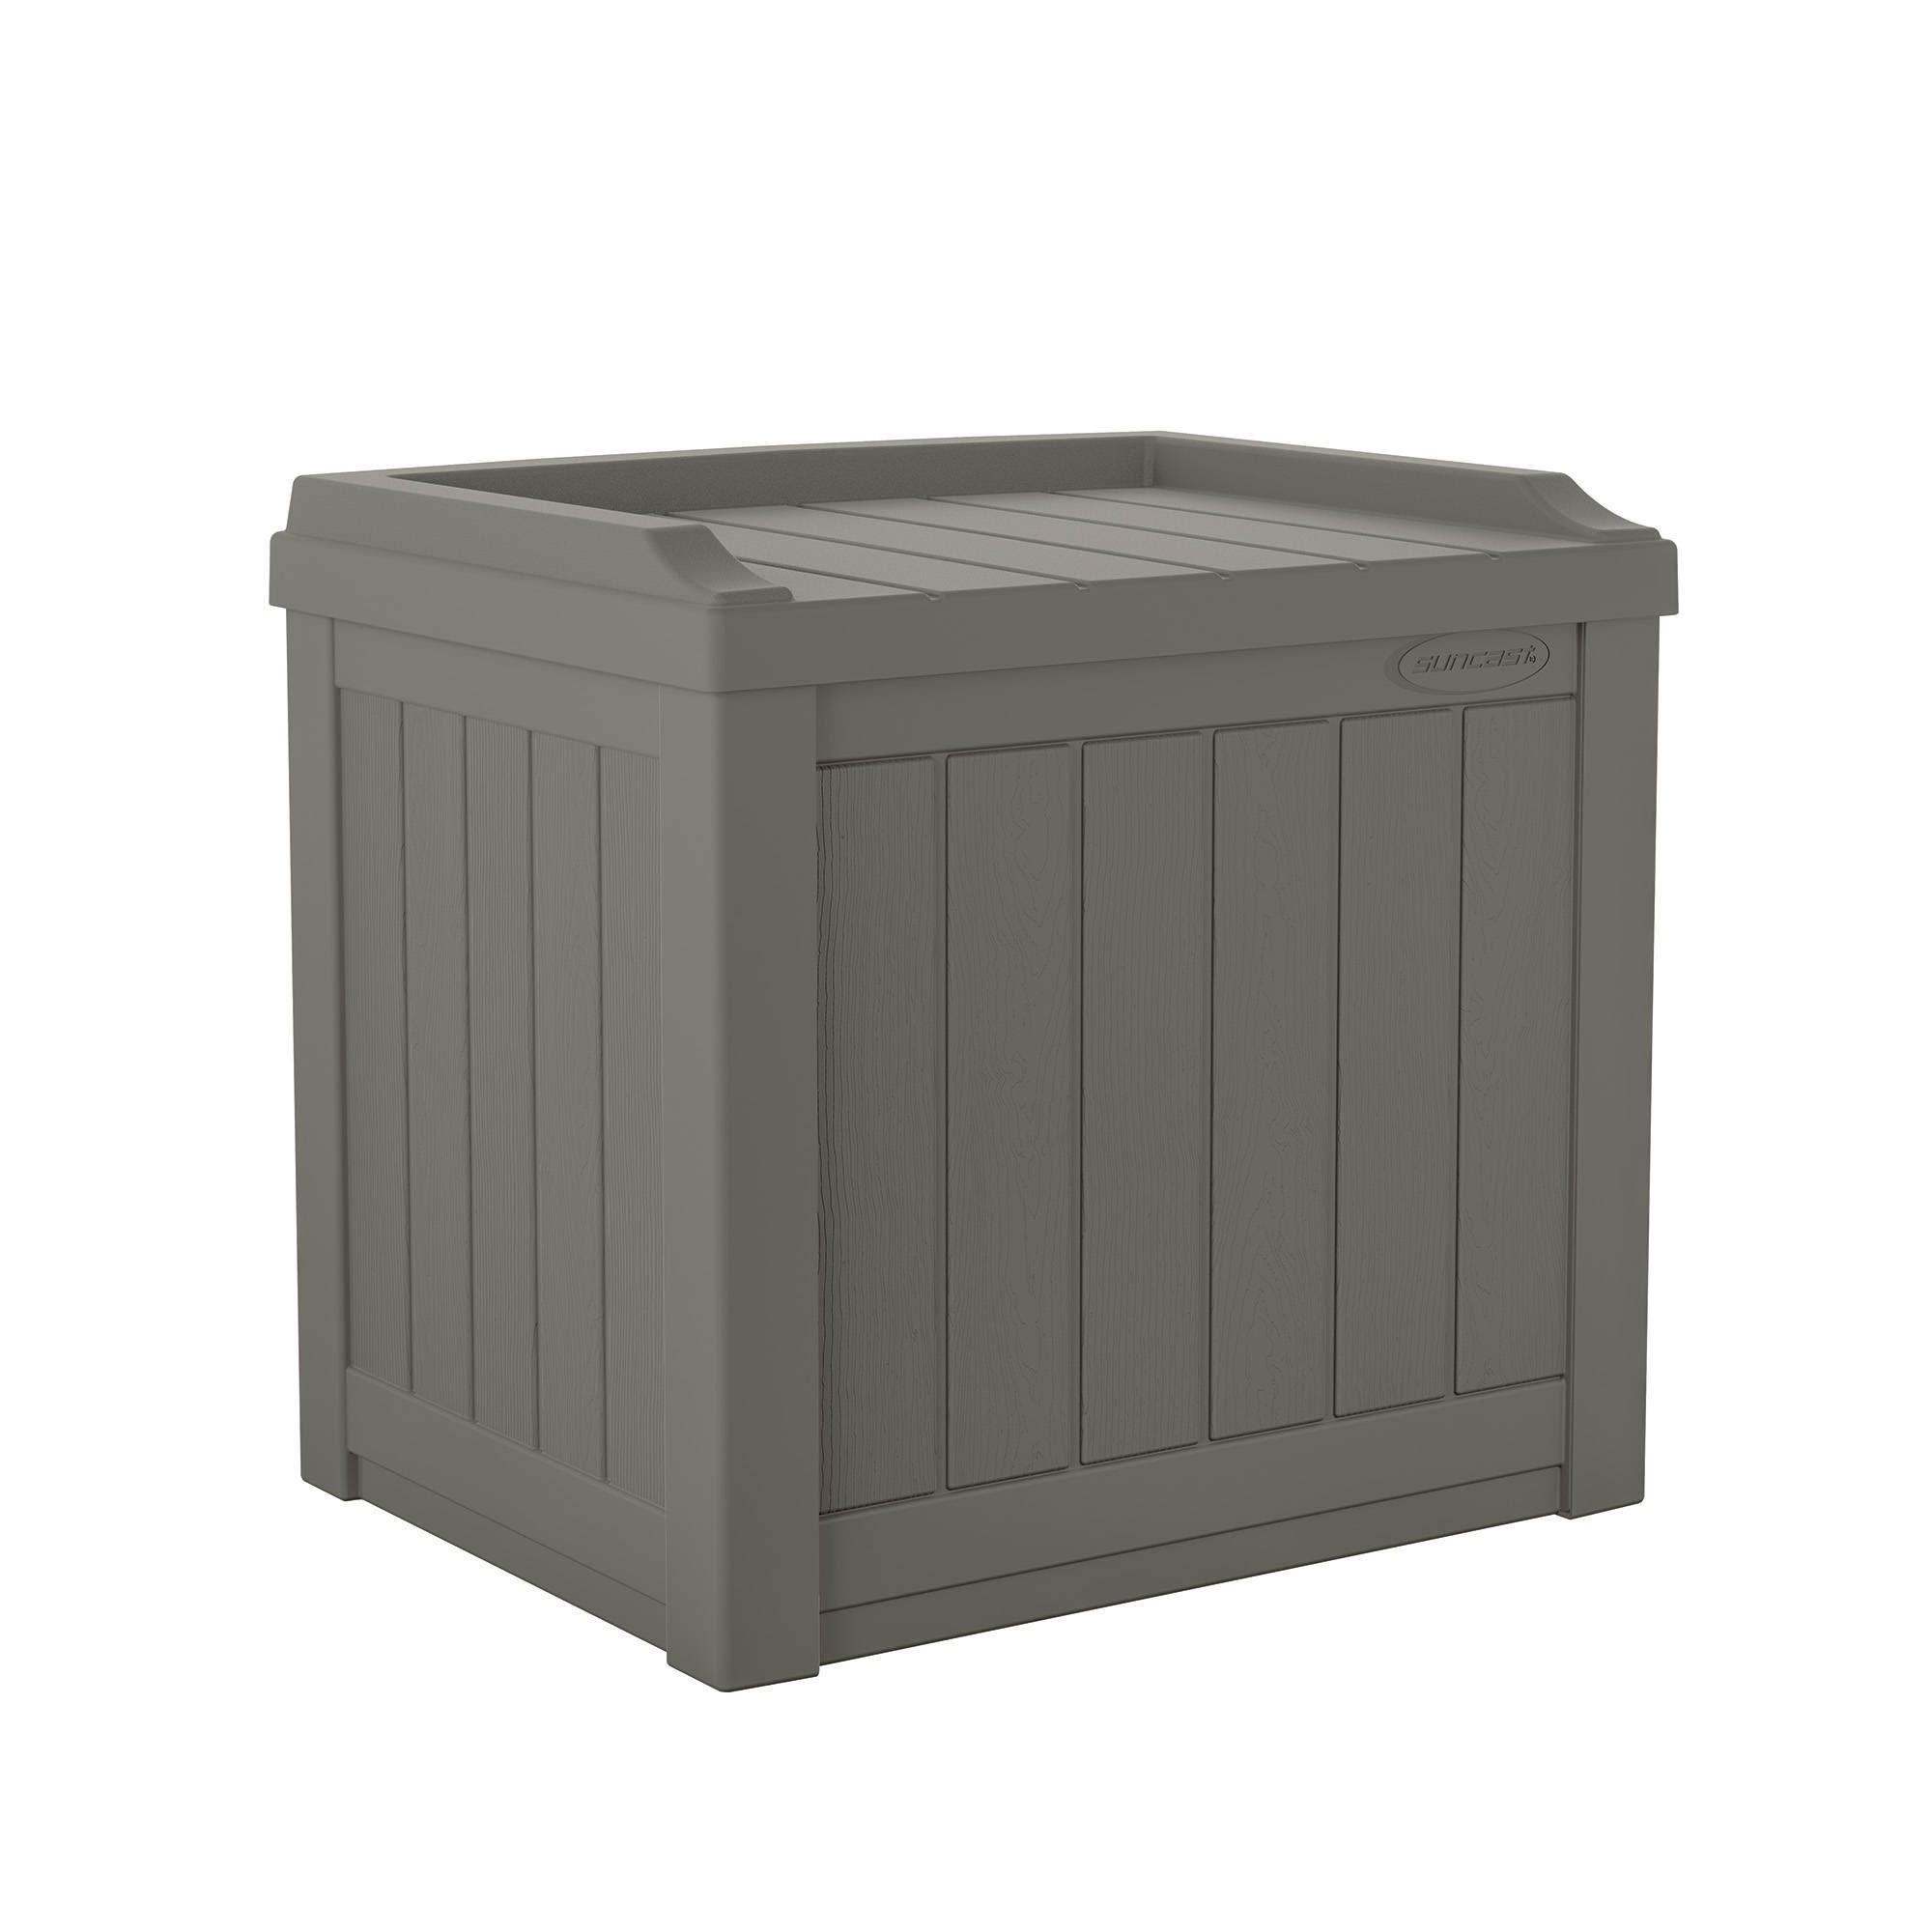 Suncast 22-Gal. Small Deck Box with Storage Seat